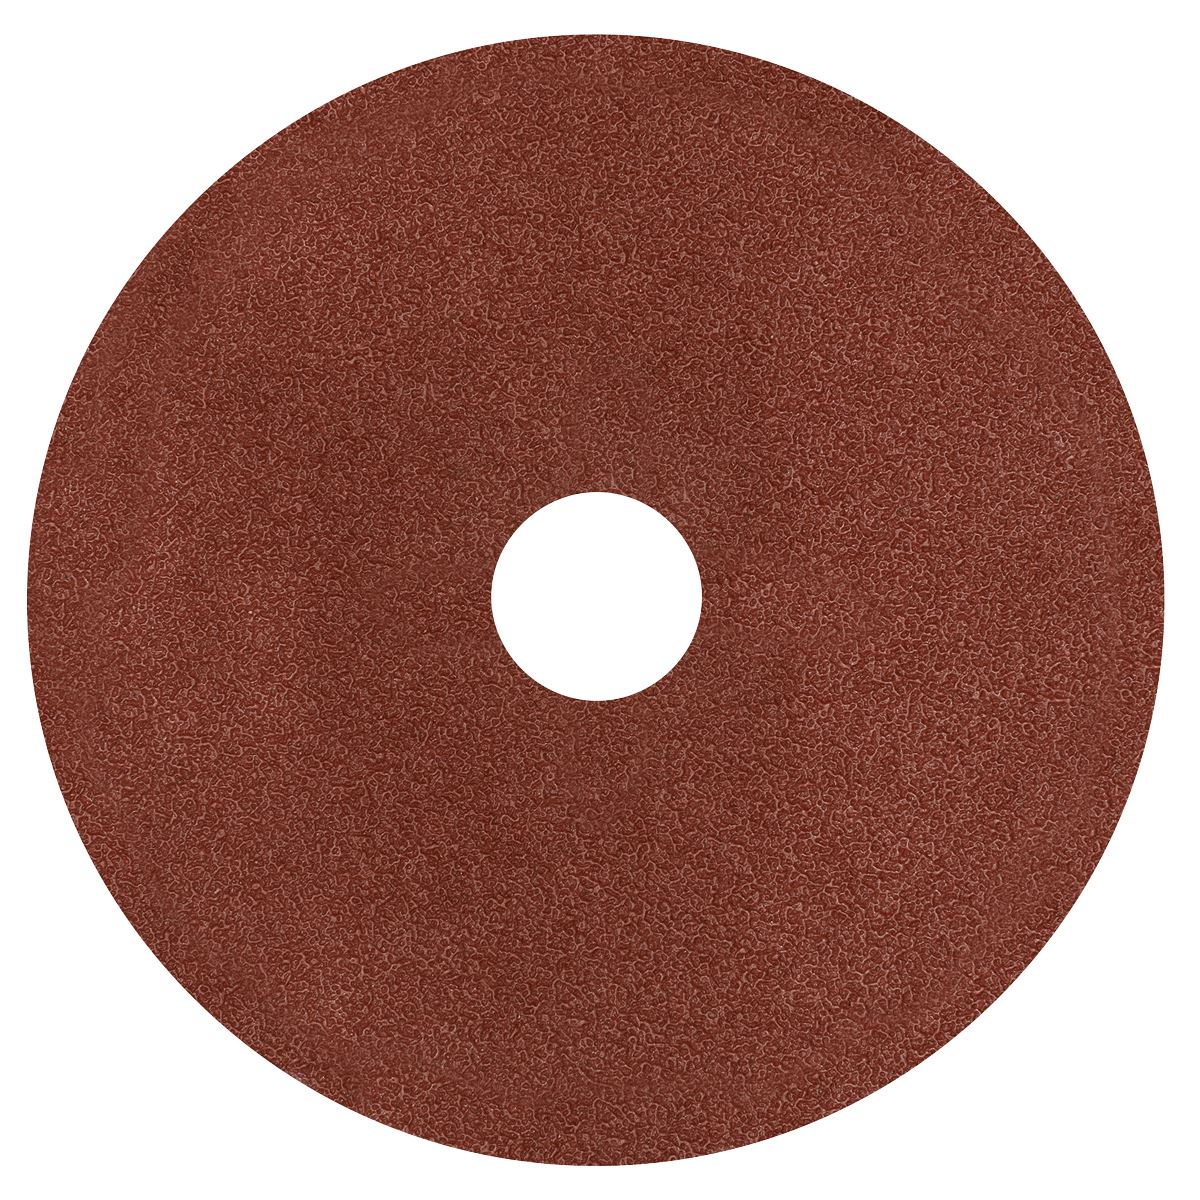 Worksafe by Sealey Fibre Backed Disc Ø125mm - 40Grit Pack of 25